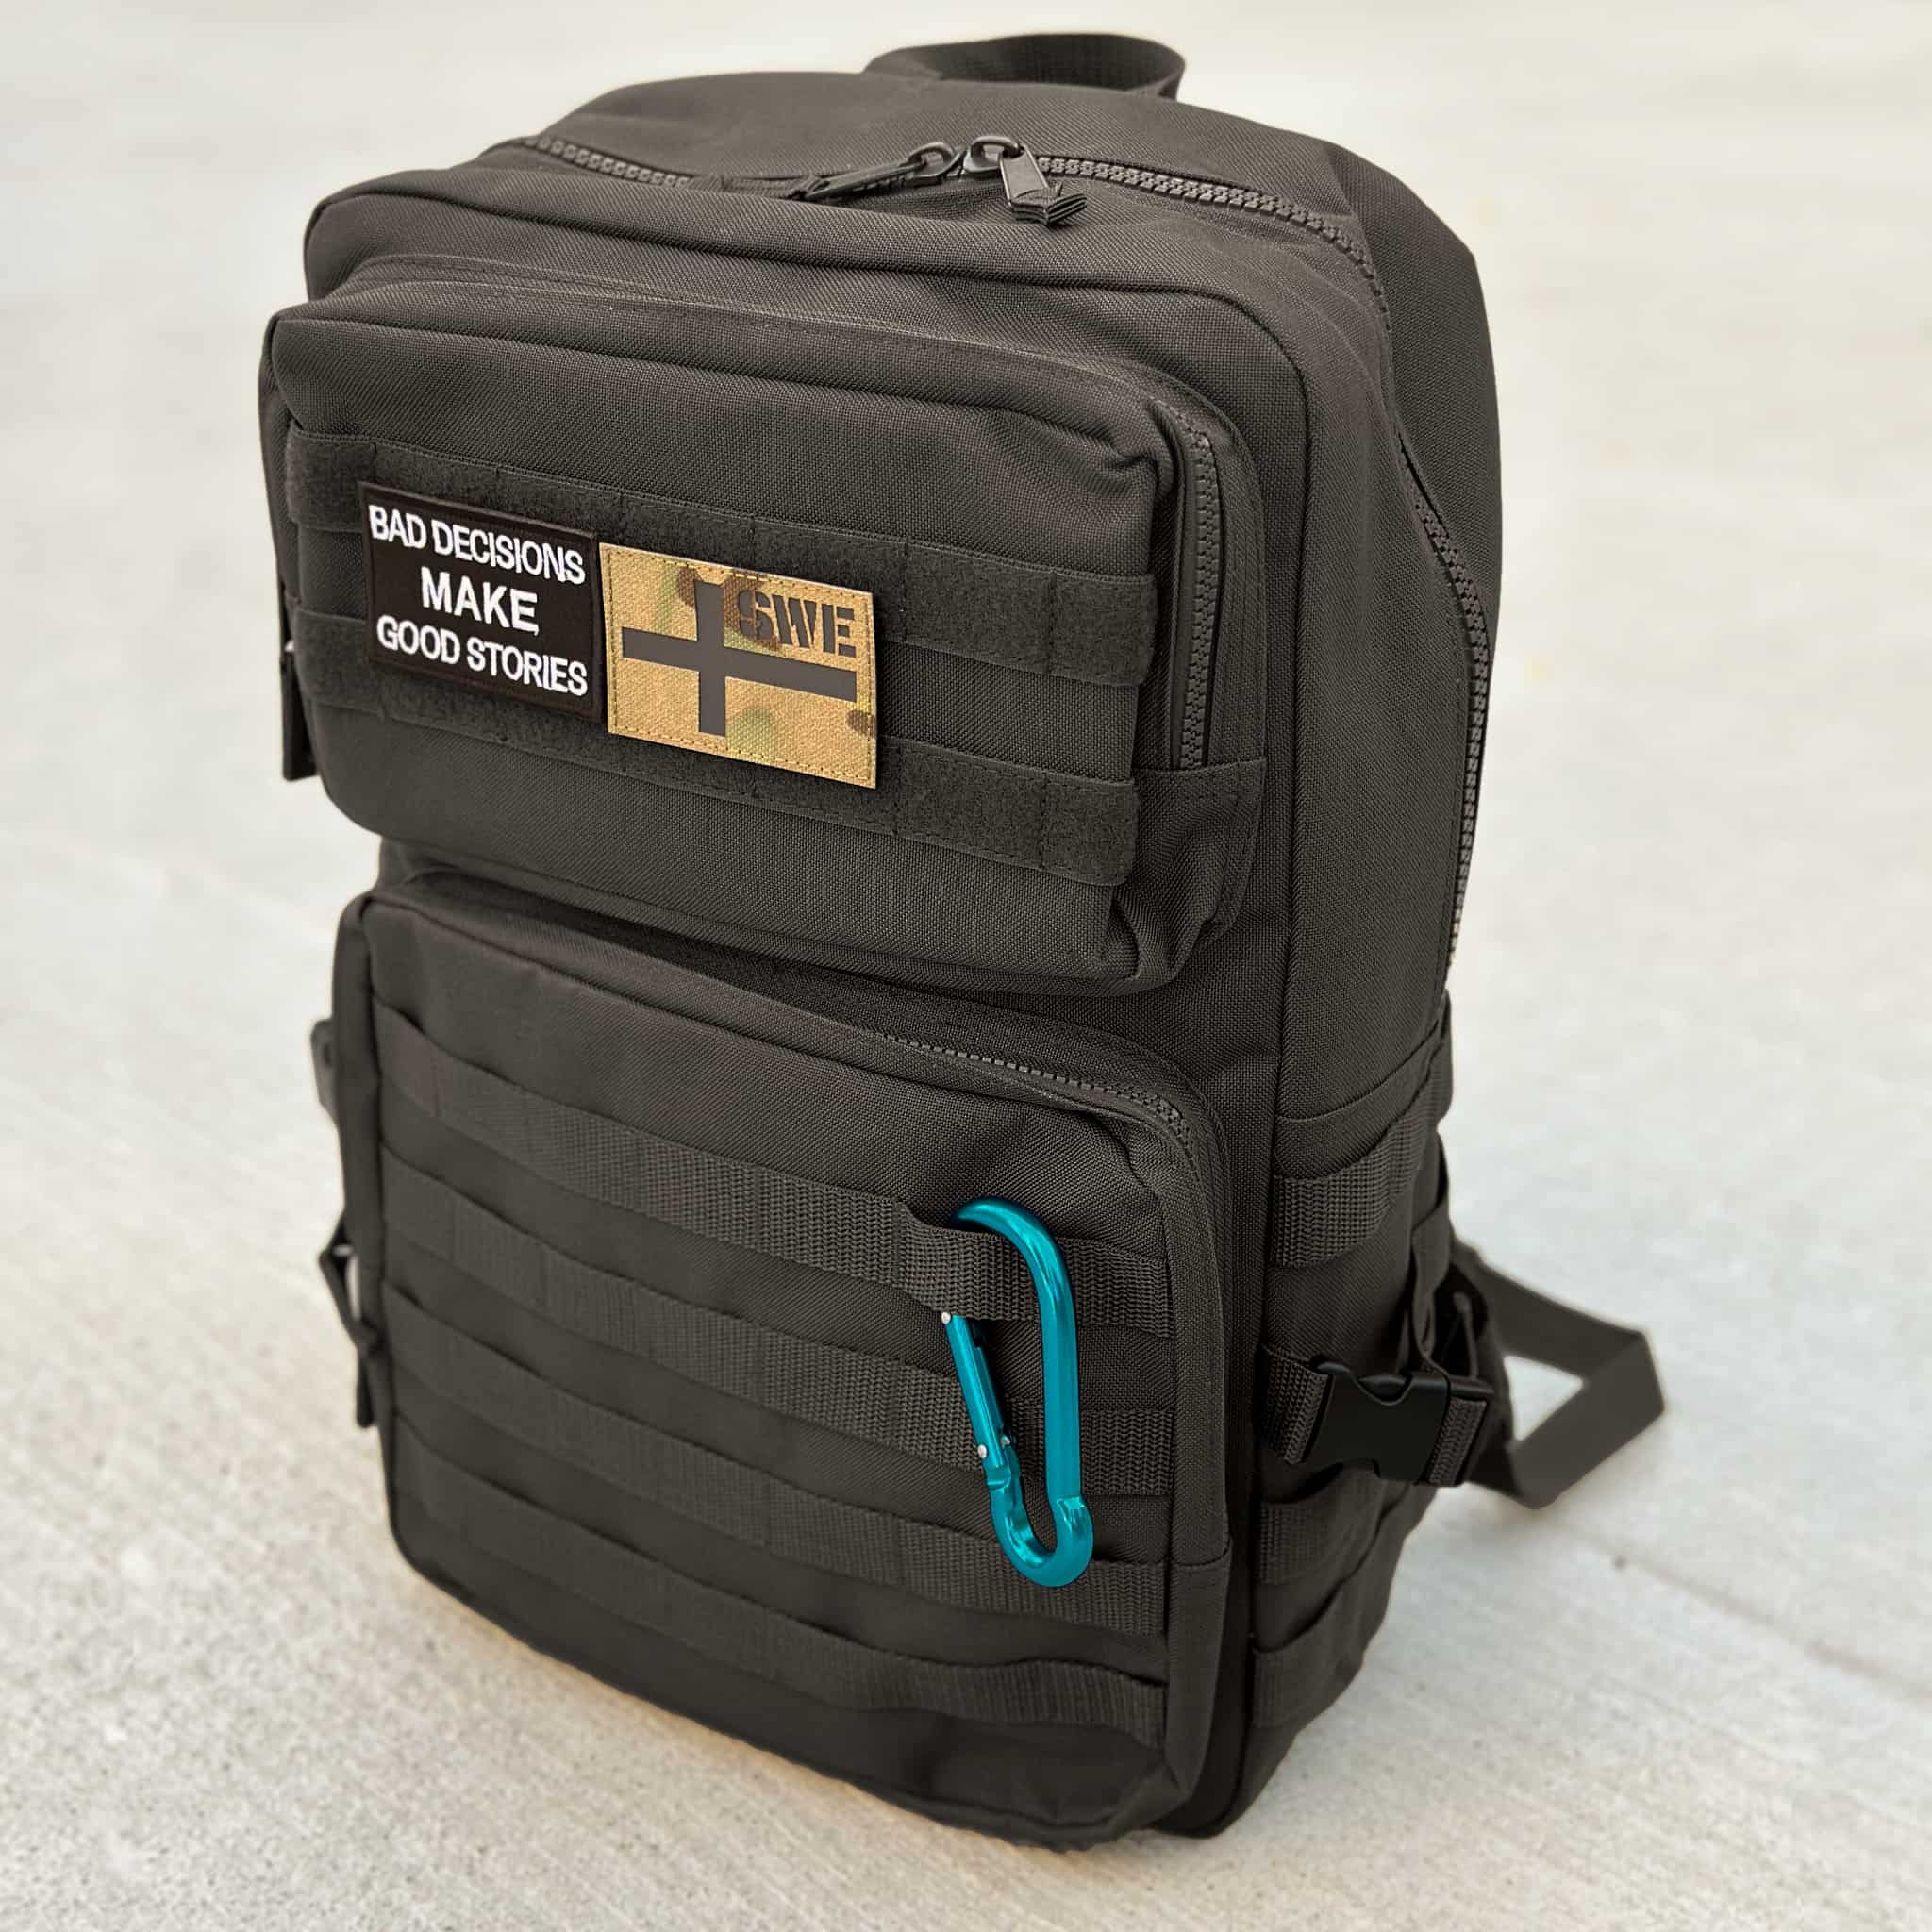 The Tactical Bag in black with hook and loop areas and MOLLE system on the back